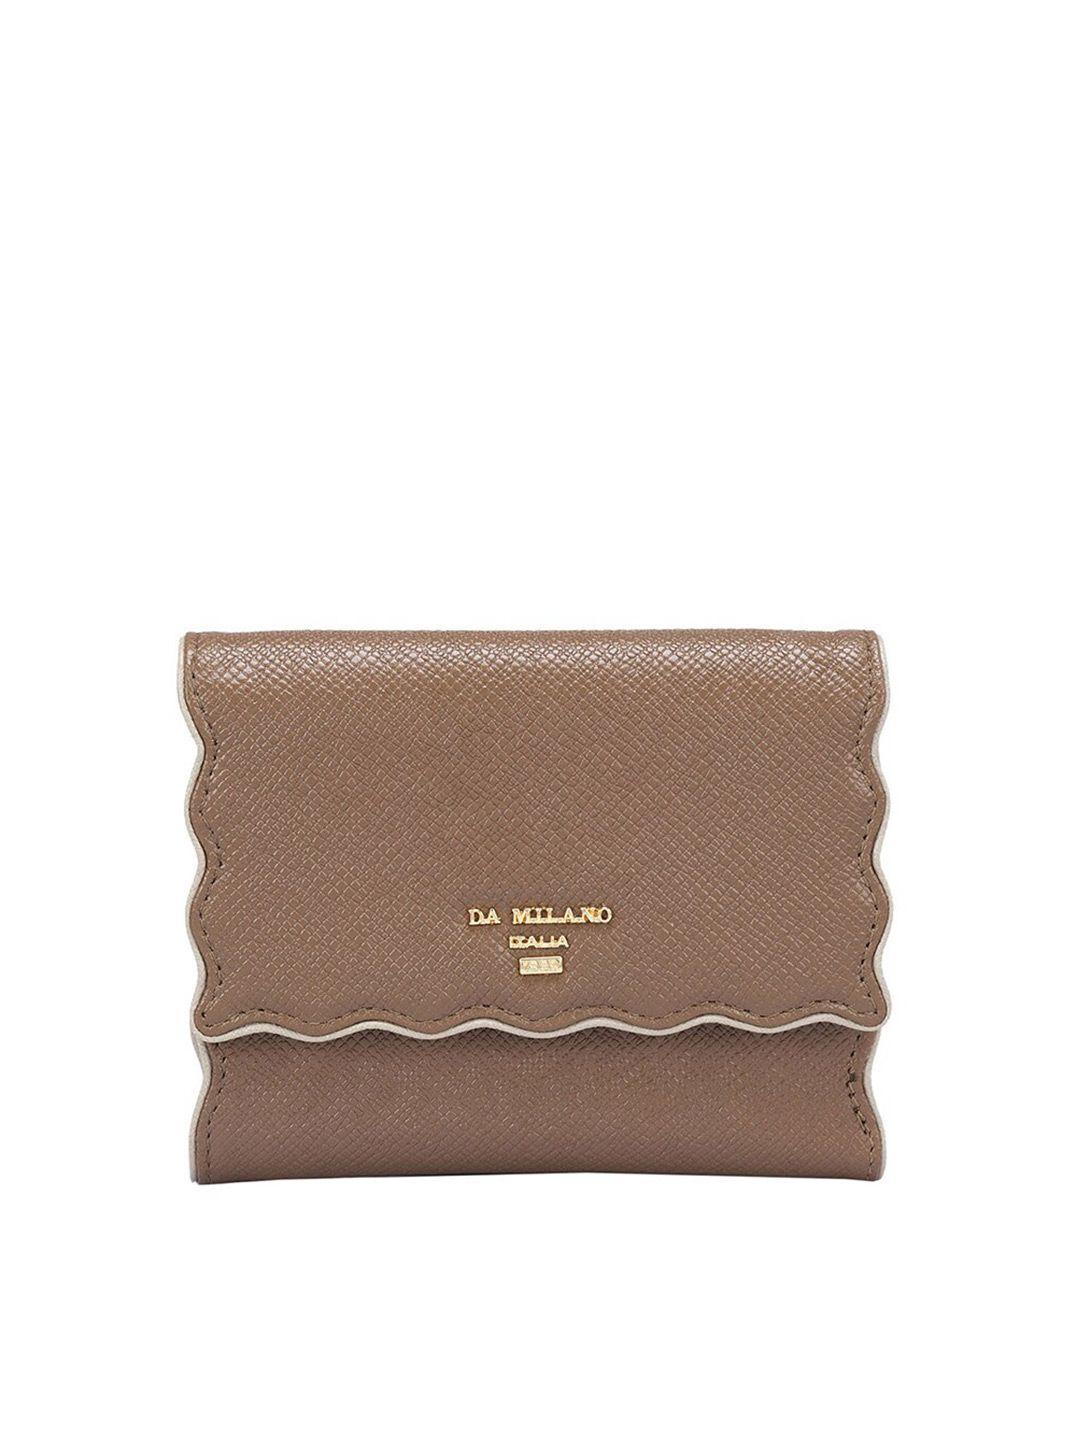 da milano women brown textured leather two fold wallet